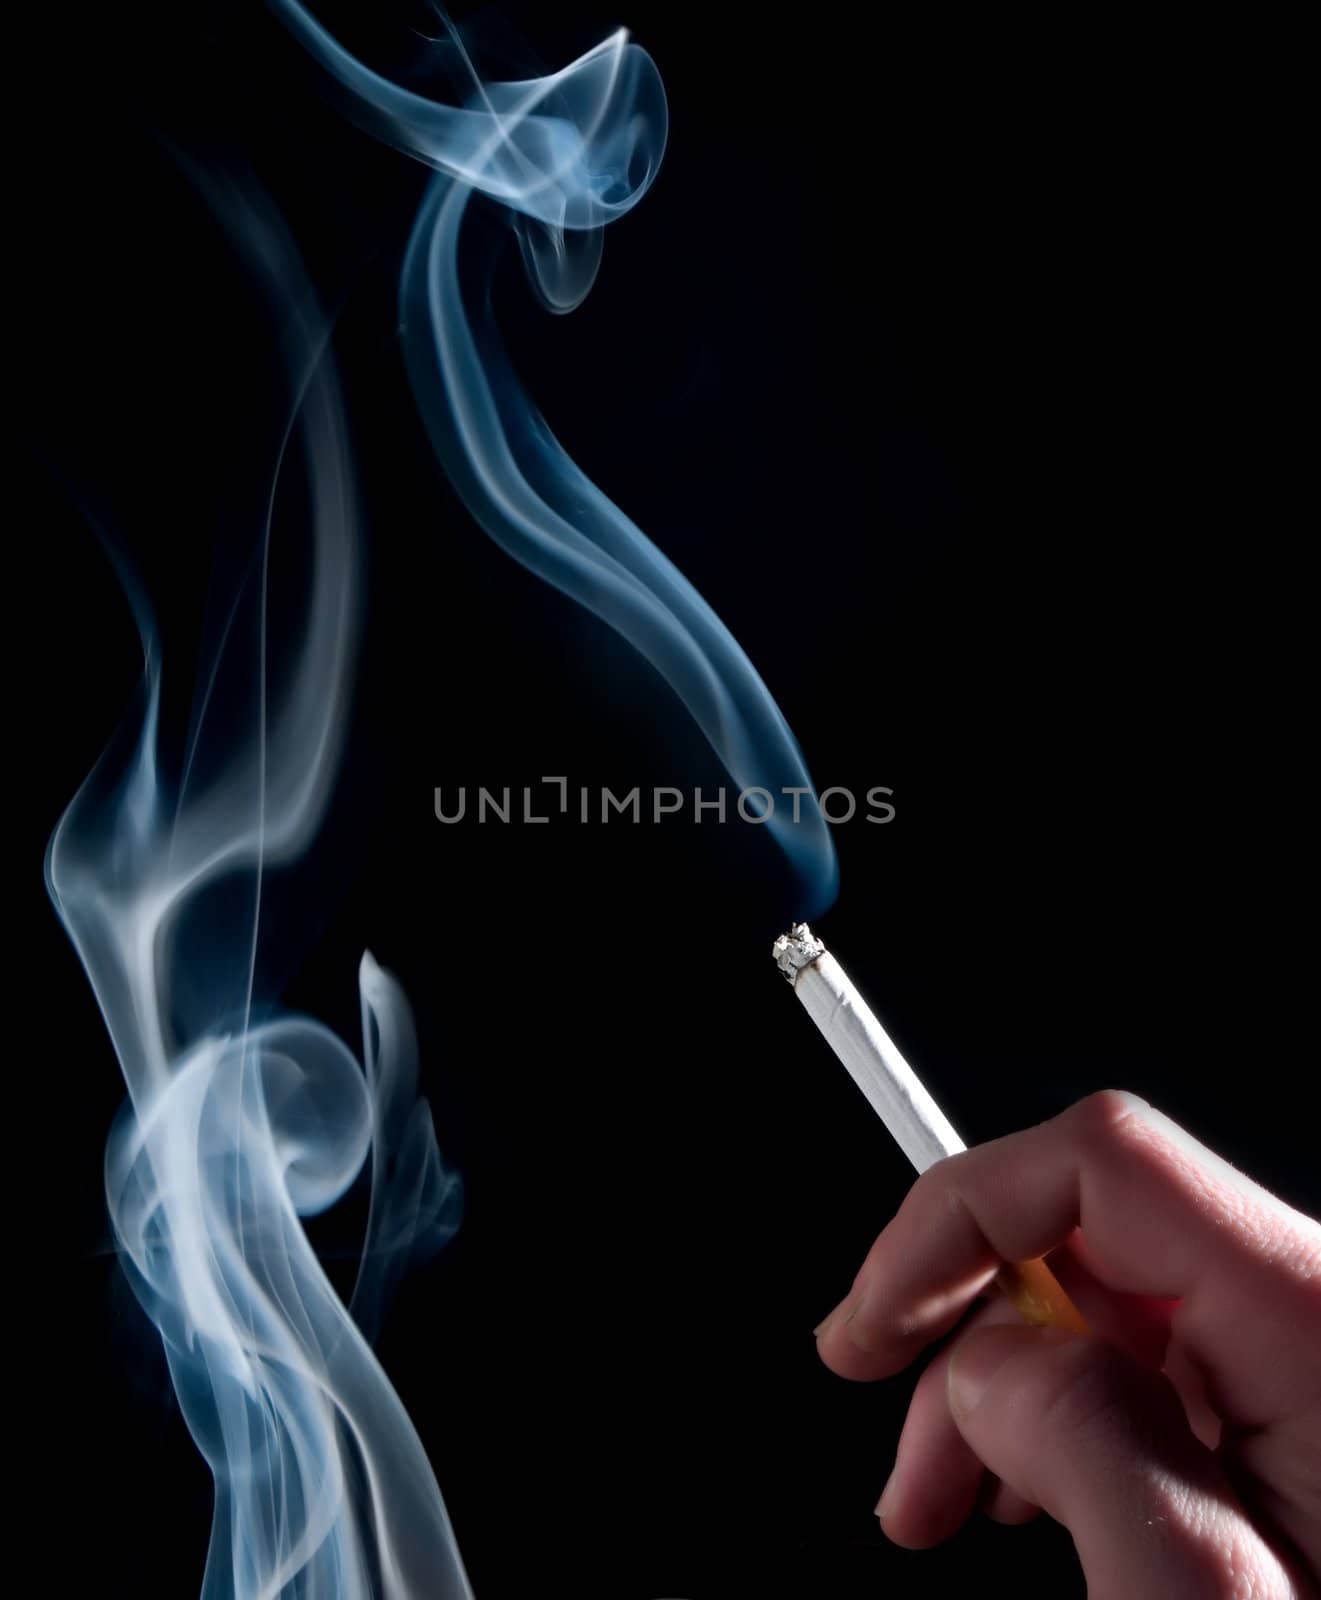 Cigarette and smoke on a black background